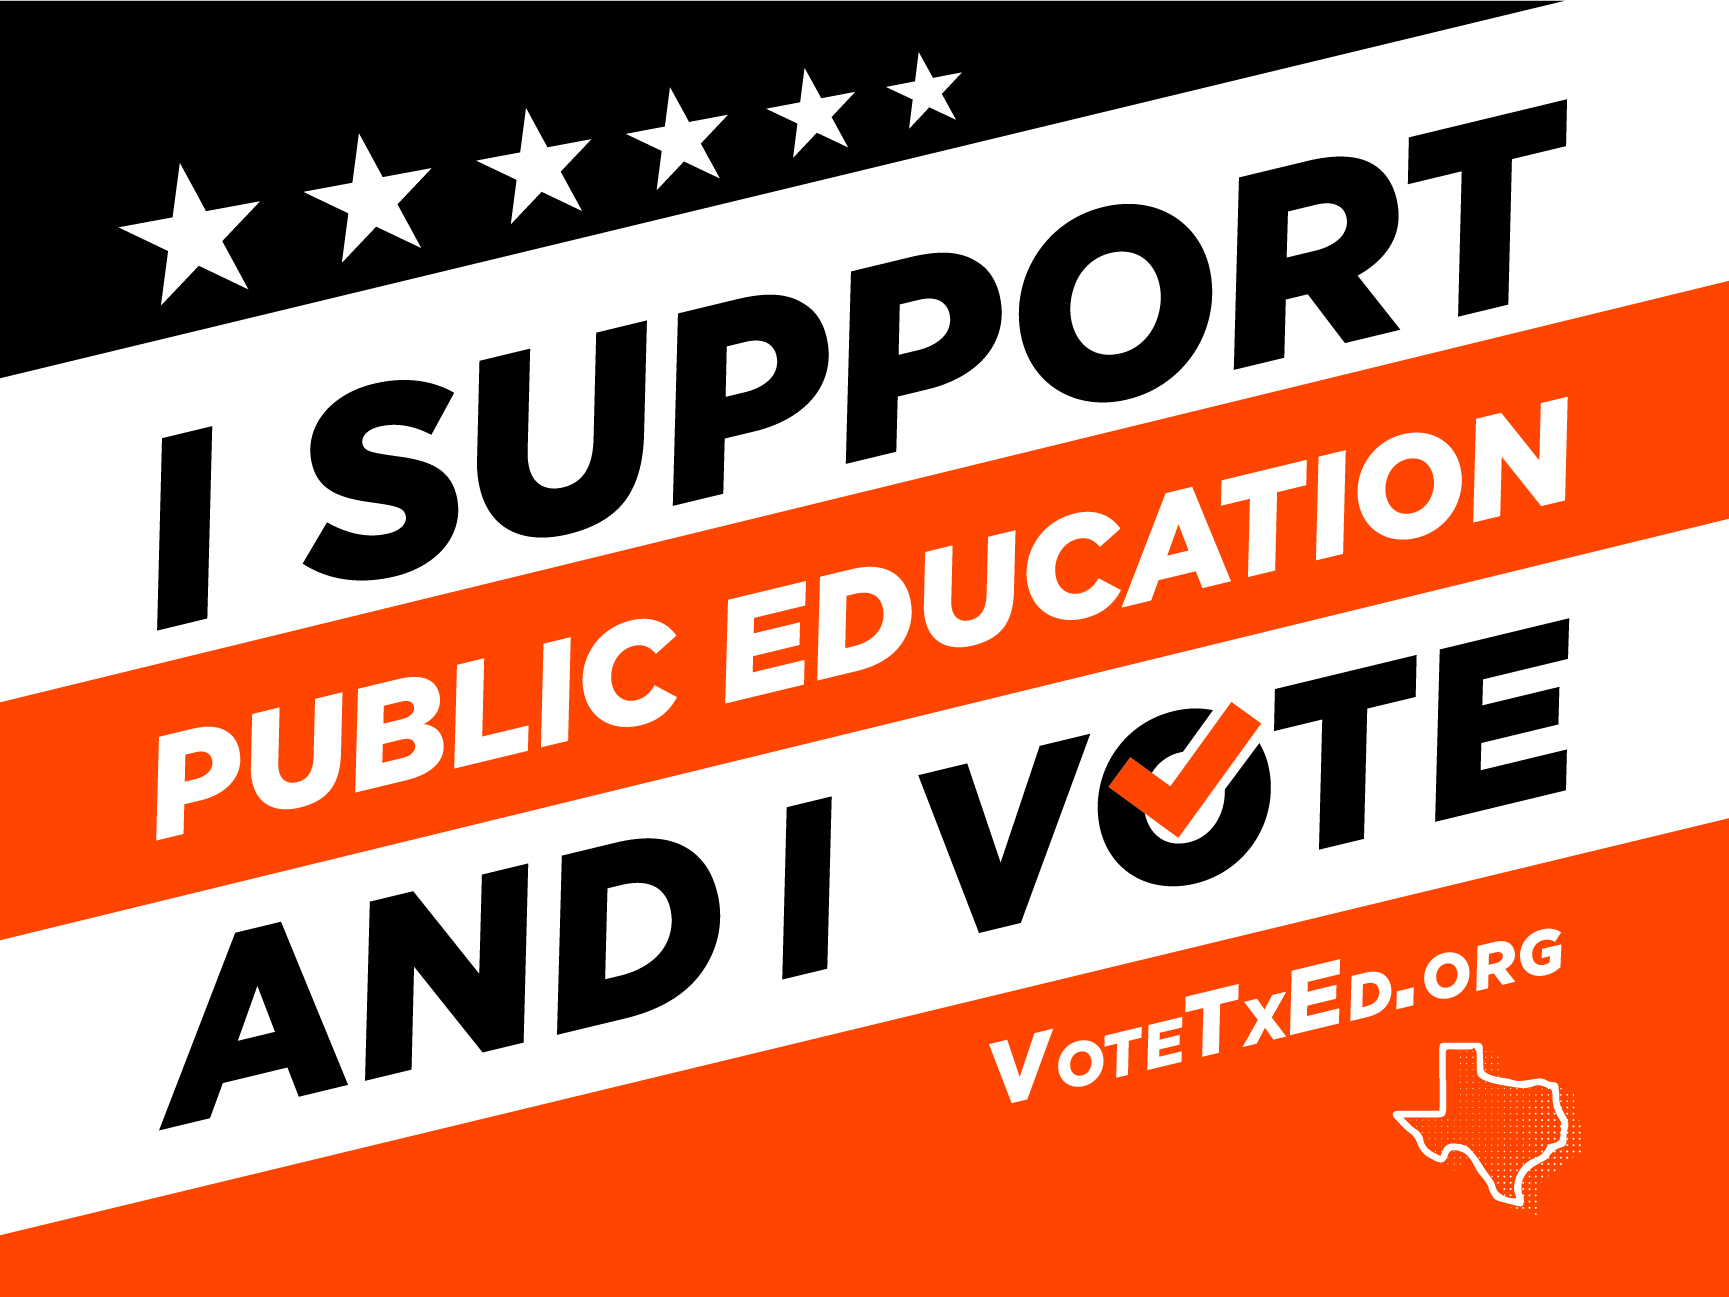 I support Public education and I vote.